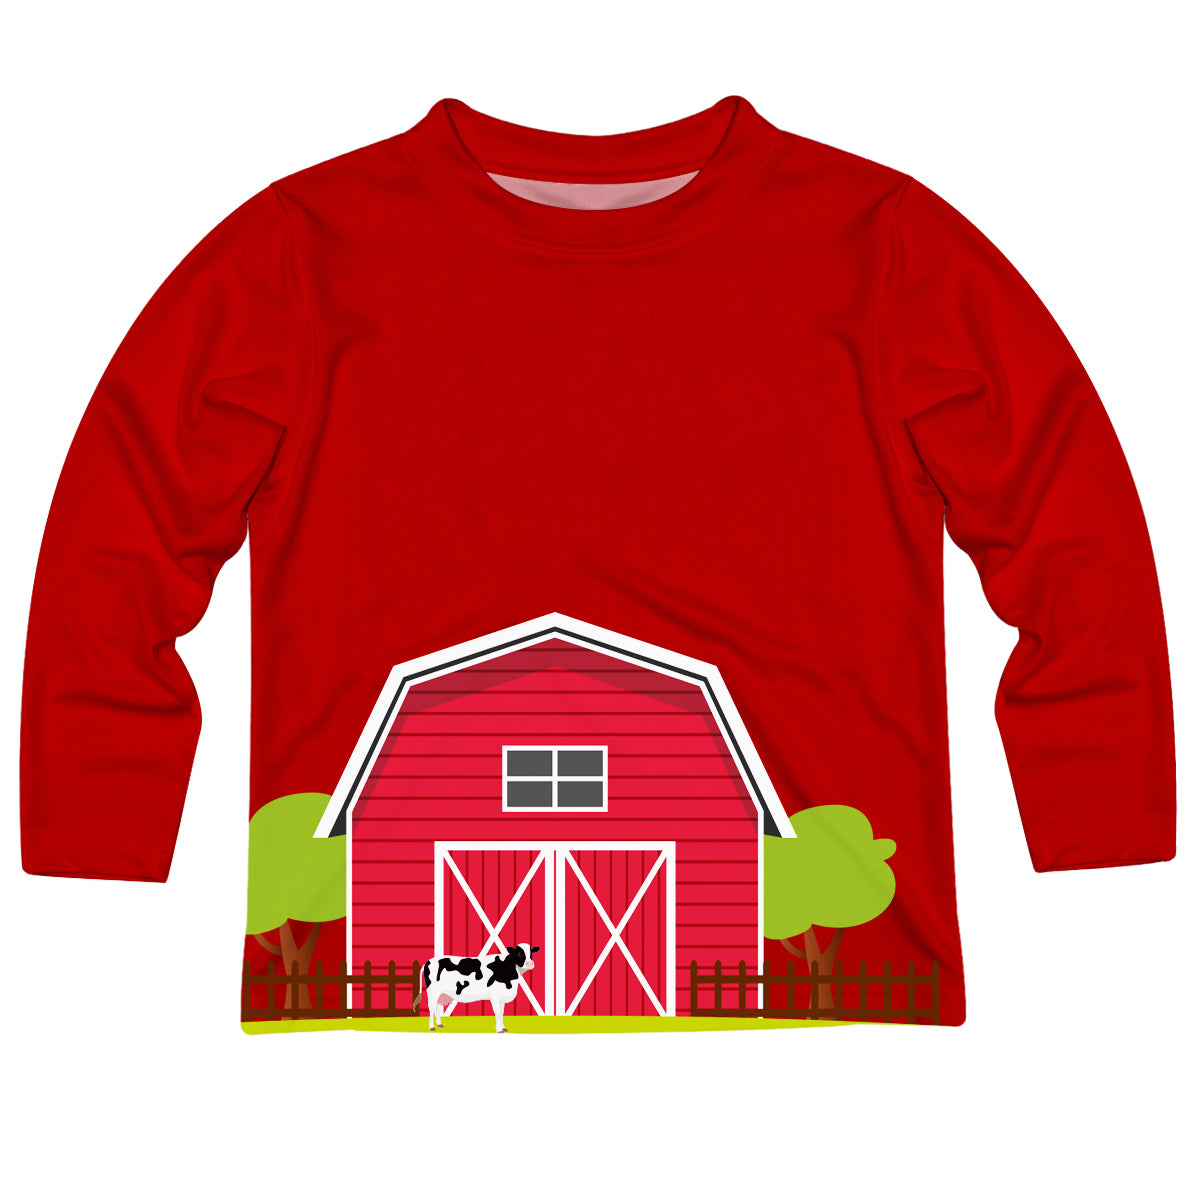 Red long sleeve tee shirt with farmer and name - Wimziy&Co.